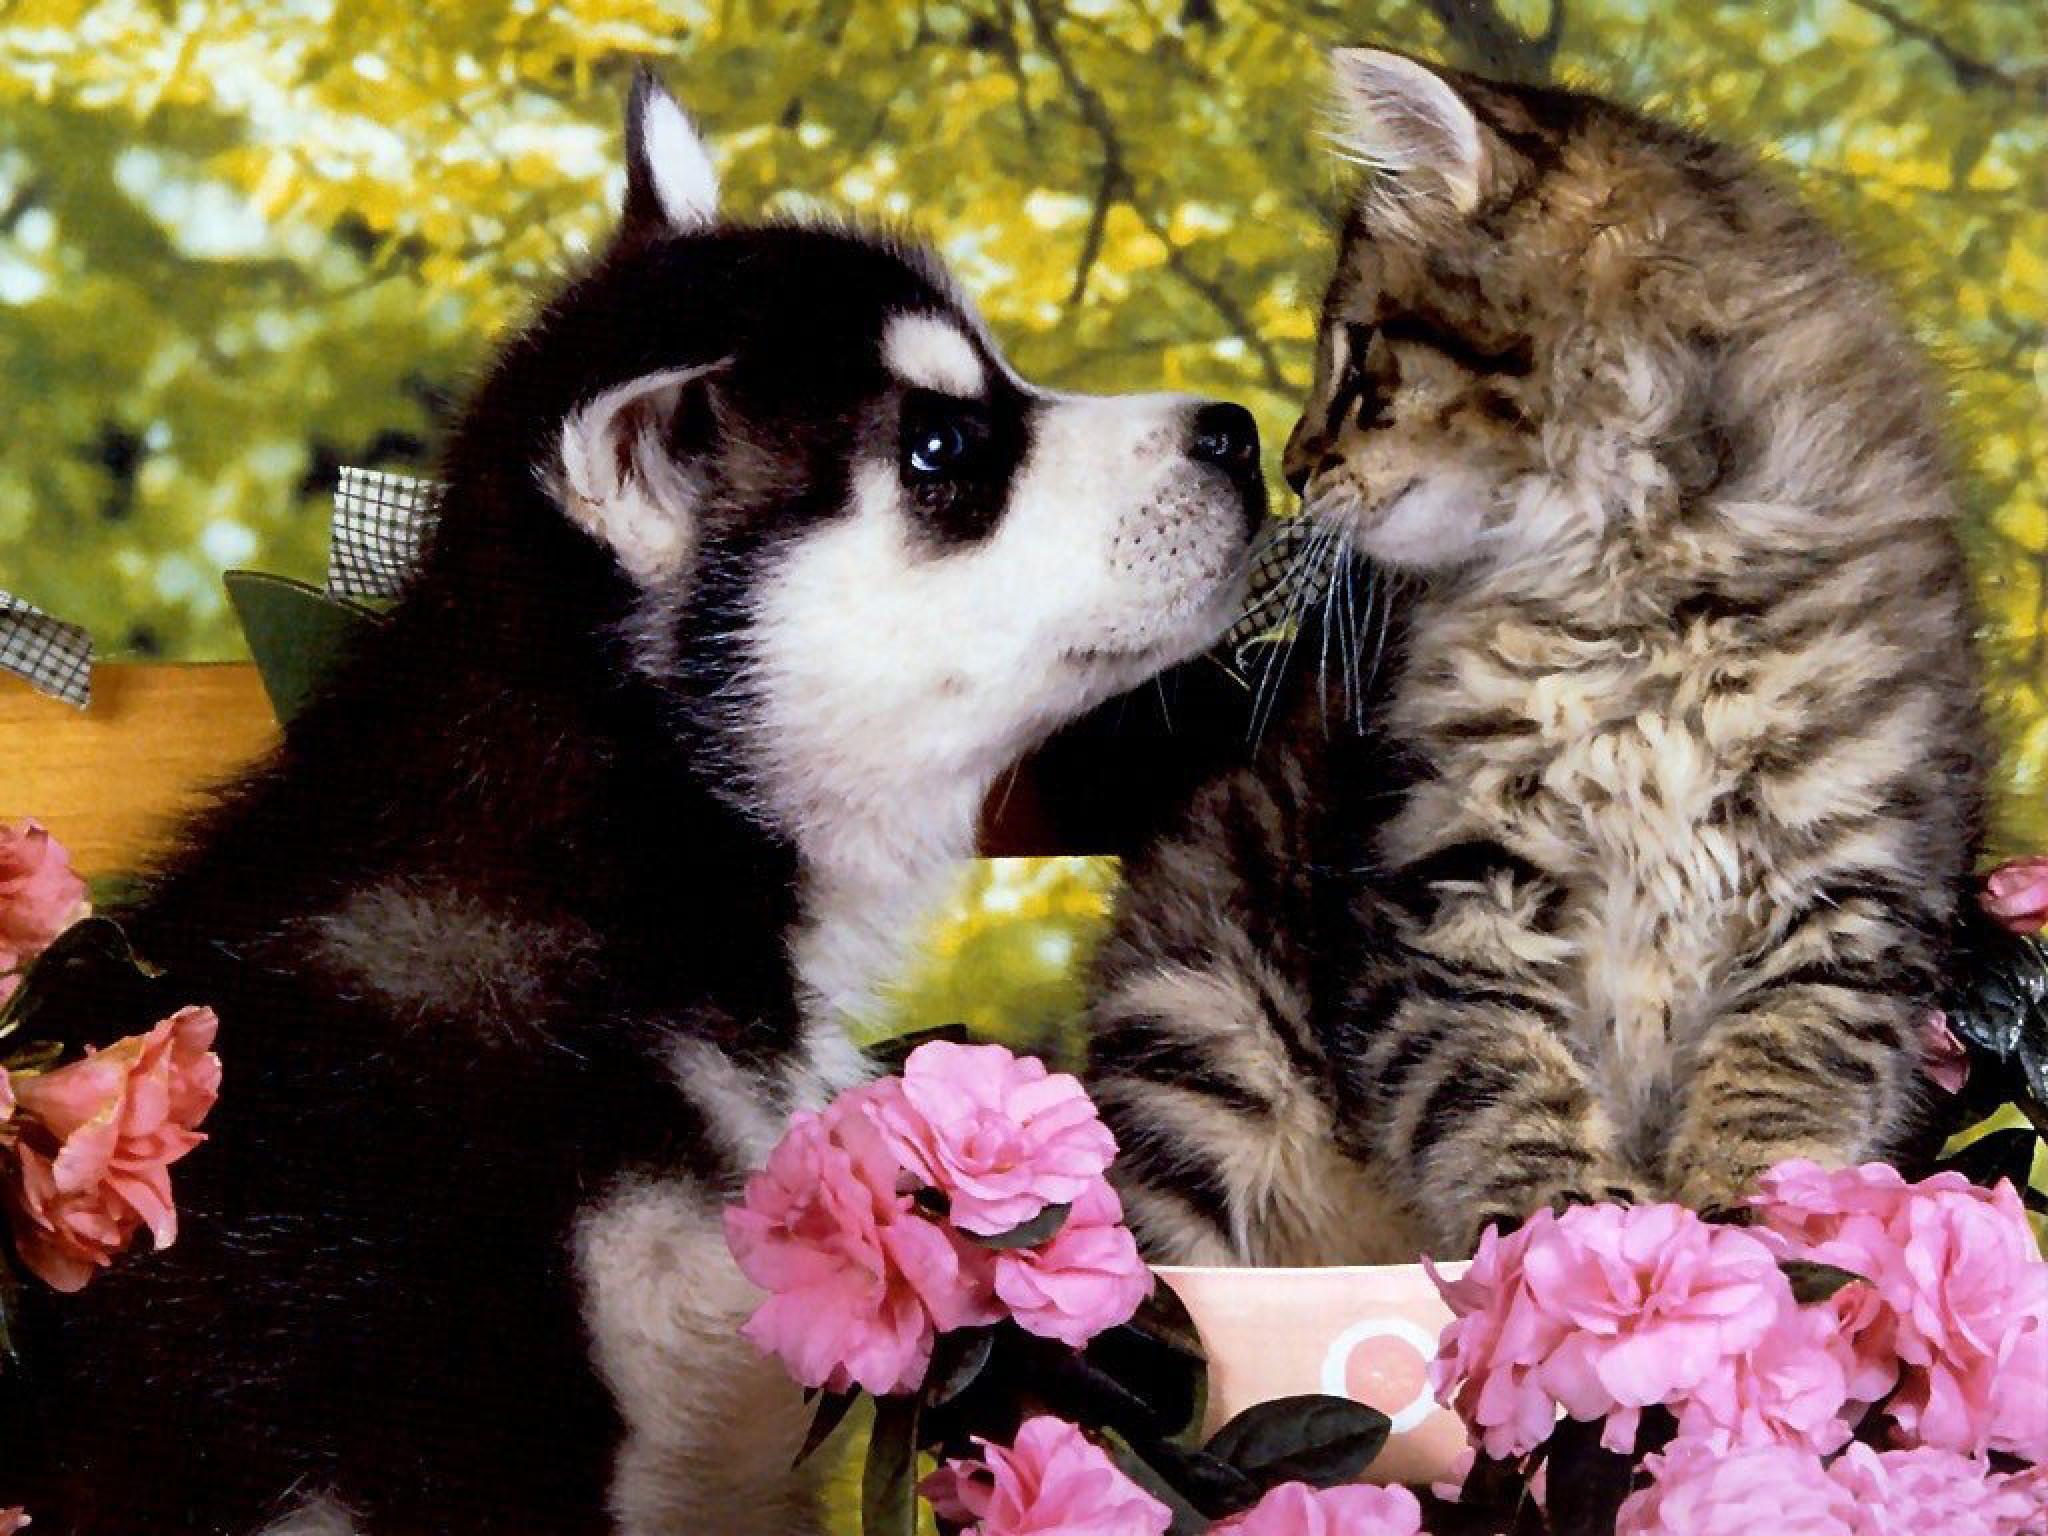 Puppies And Kittens Wallpaper